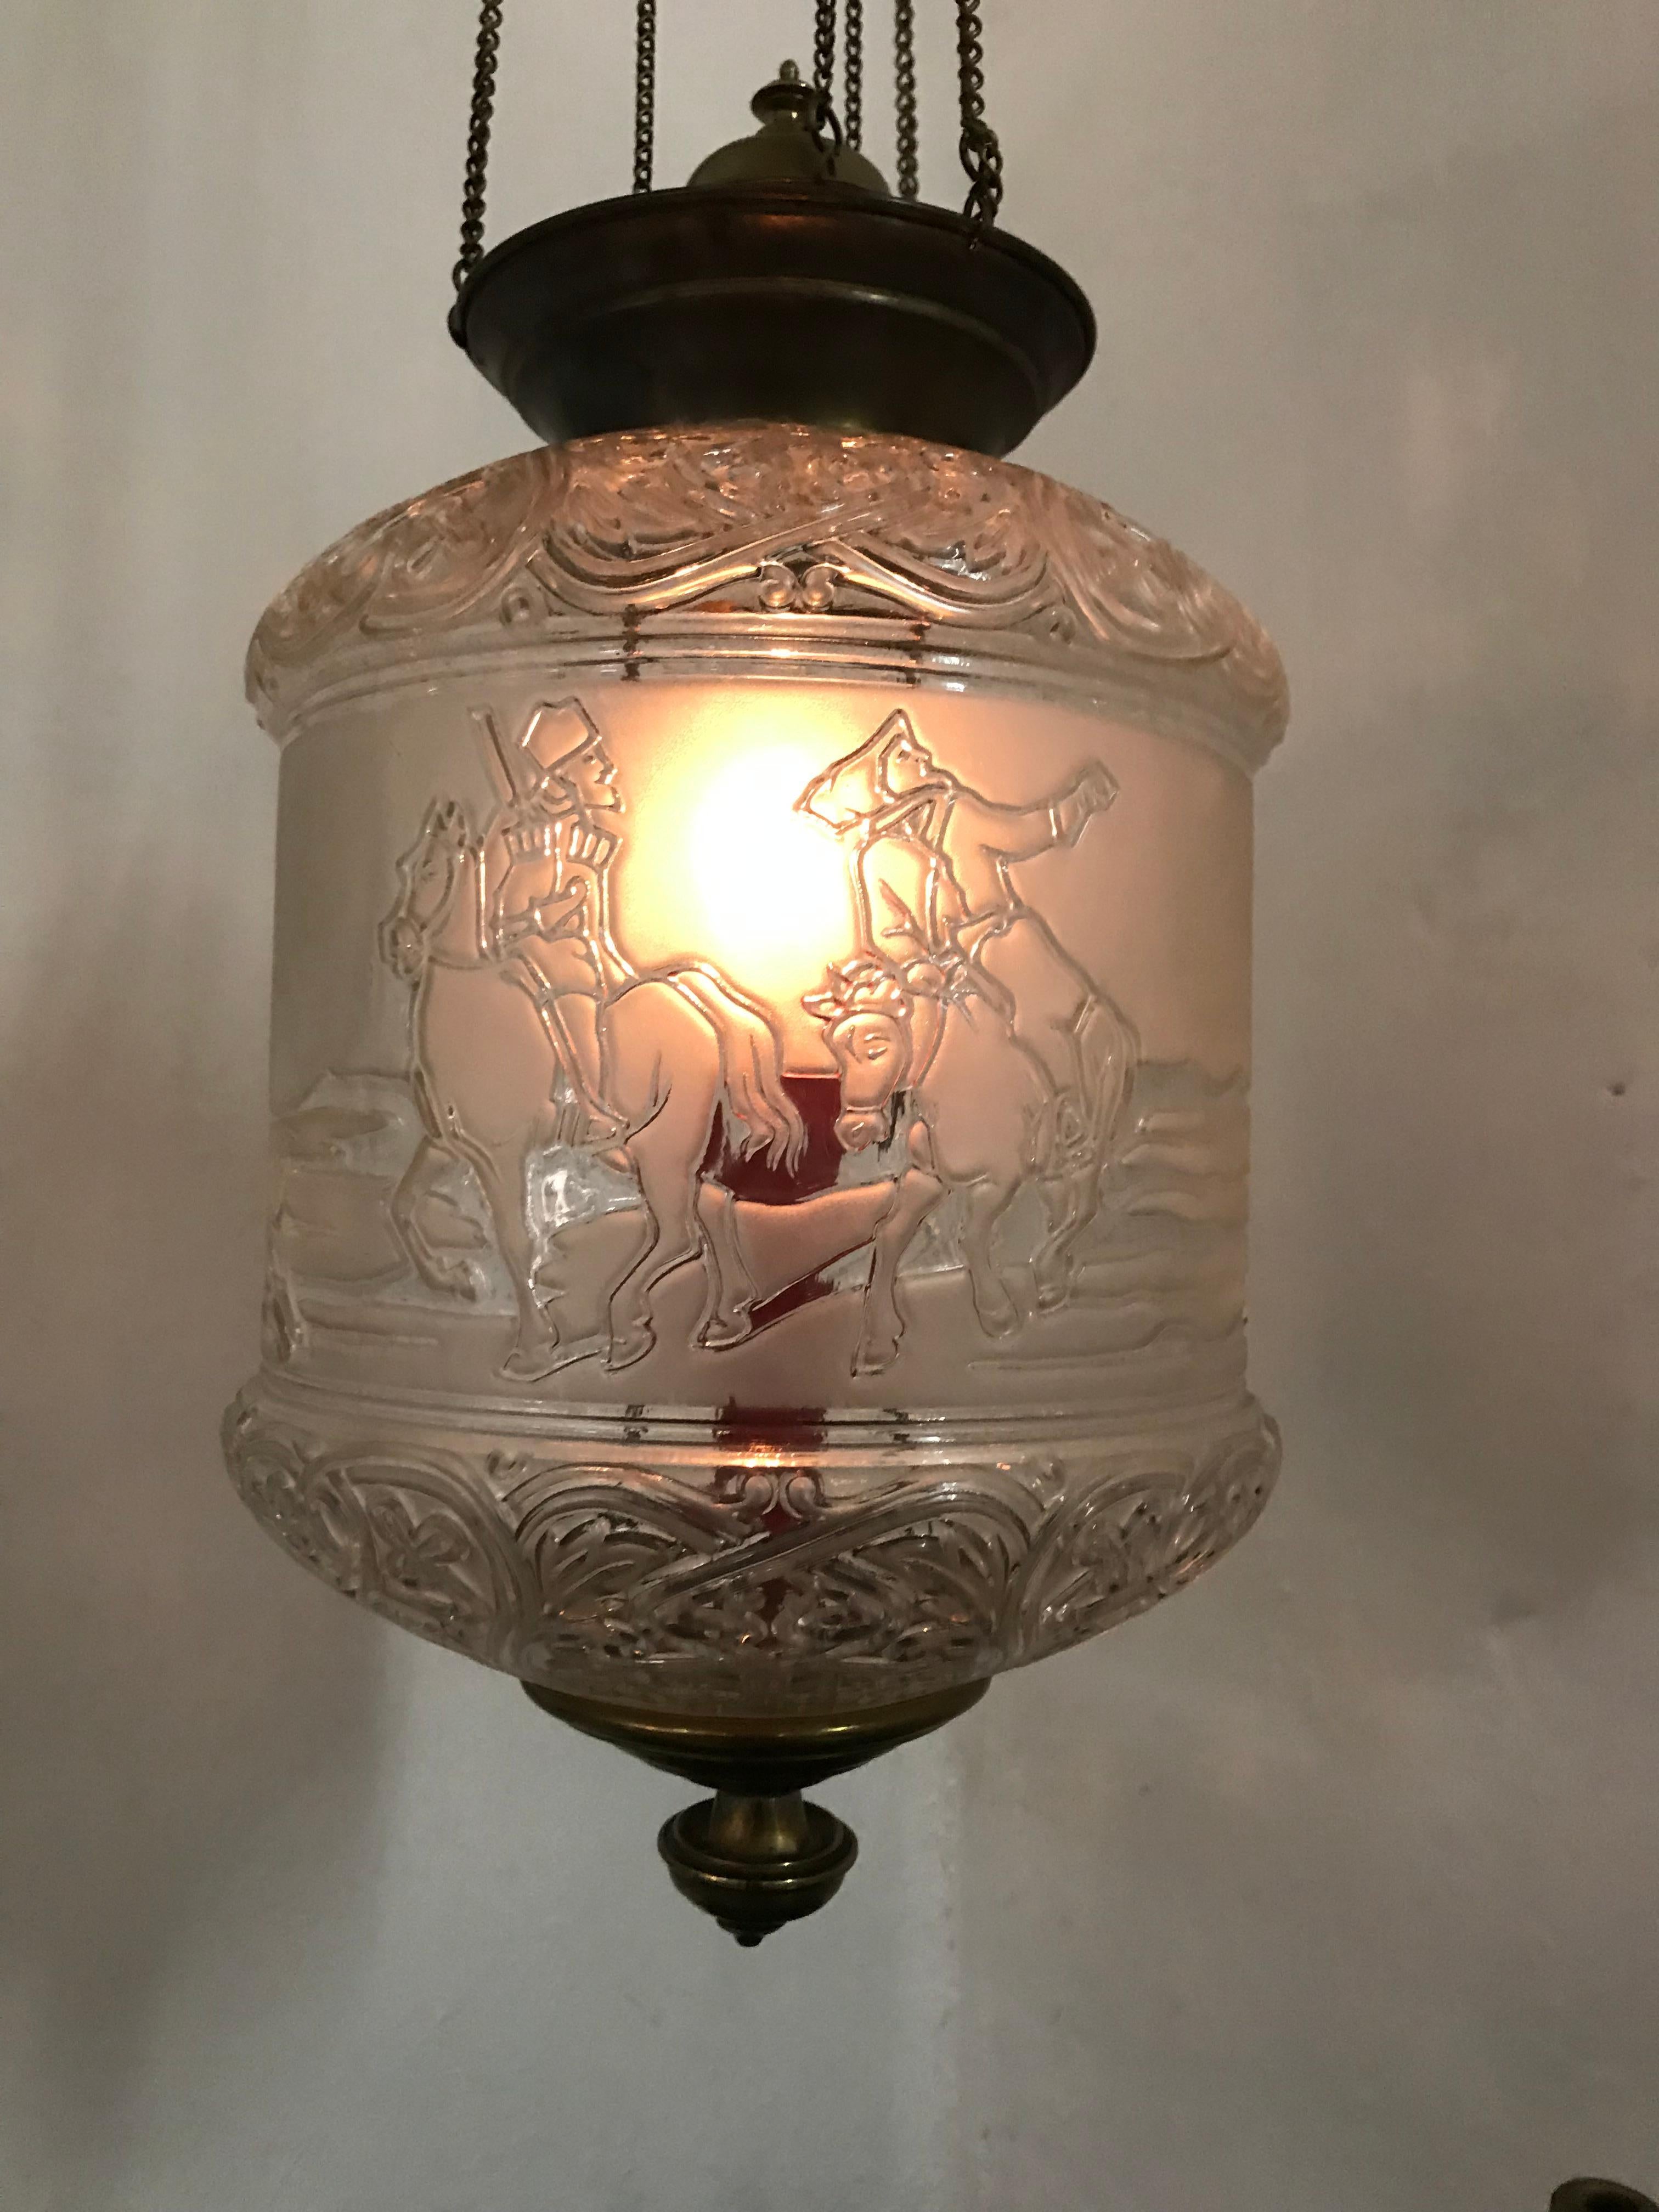 Three late 19th or early 20th century glass Lanterns by Baccarat France, all signed in the bottom with Baccarat and Depose marks.
They have two panels in which they depict a man on a Horse-pulled sleigh and on the other, 2 soldiers 